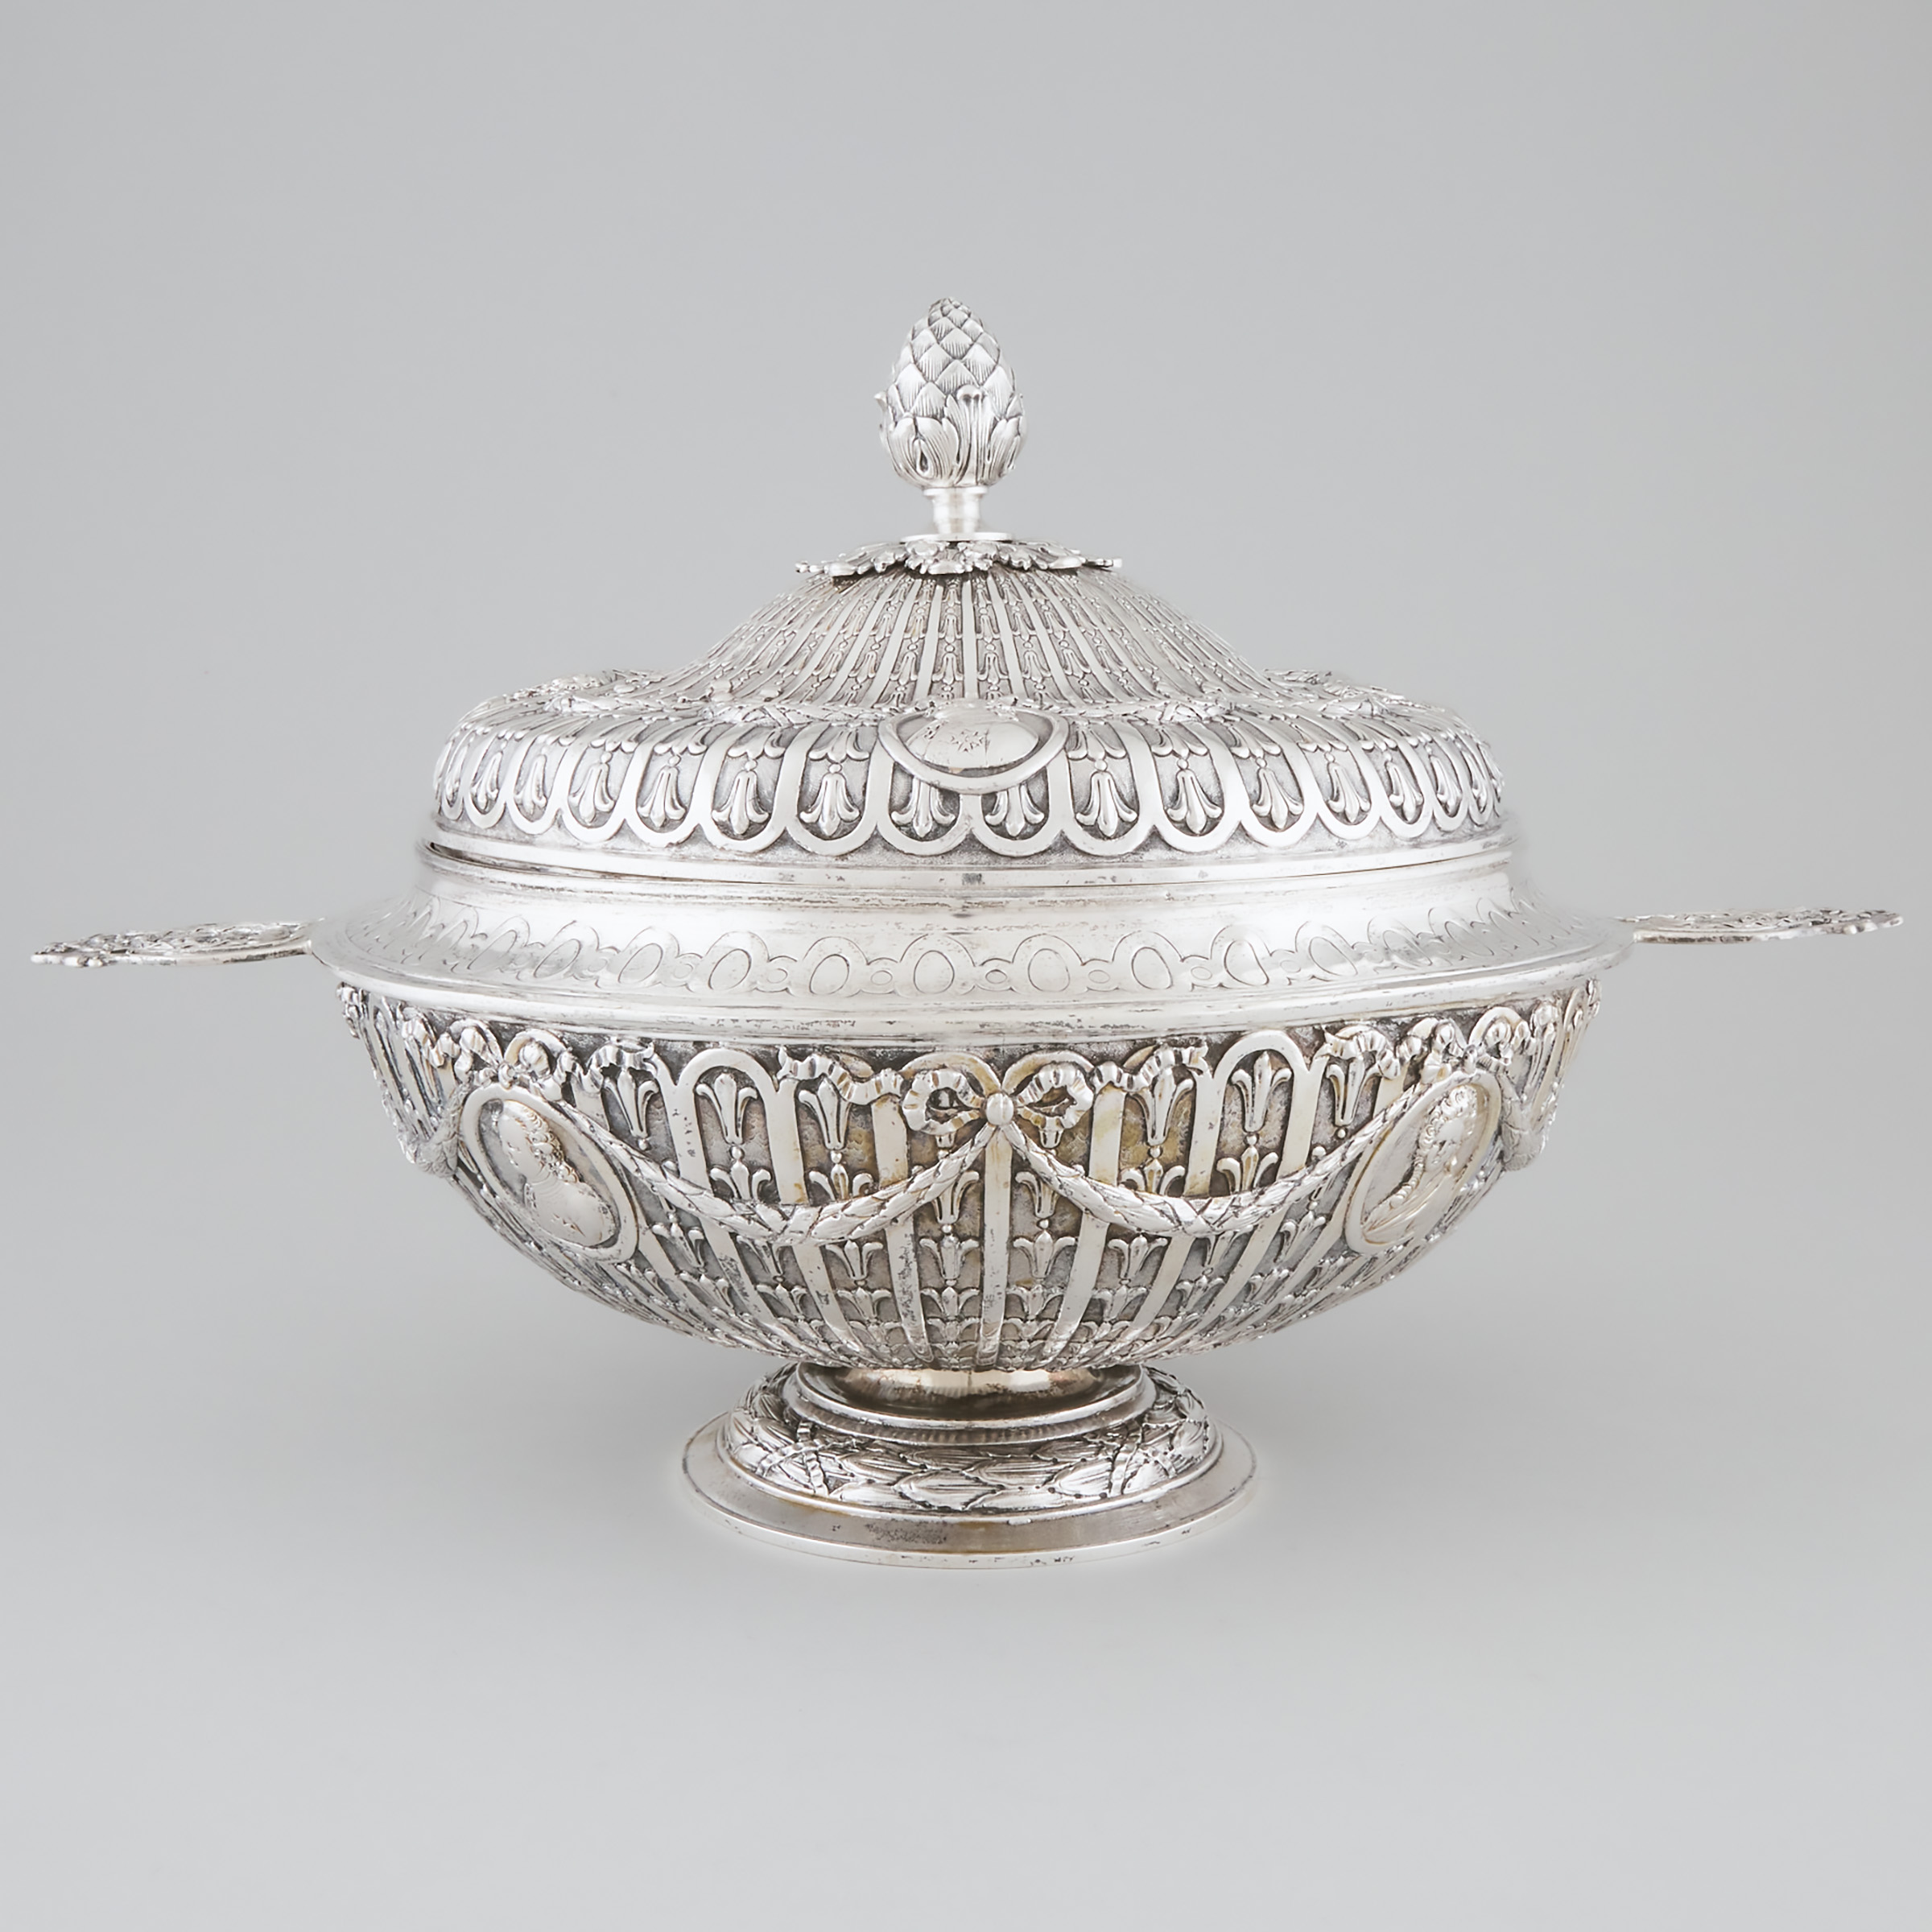 German Silver Large Two-Handled Tureen and Cover, probably Hanau, c.1900